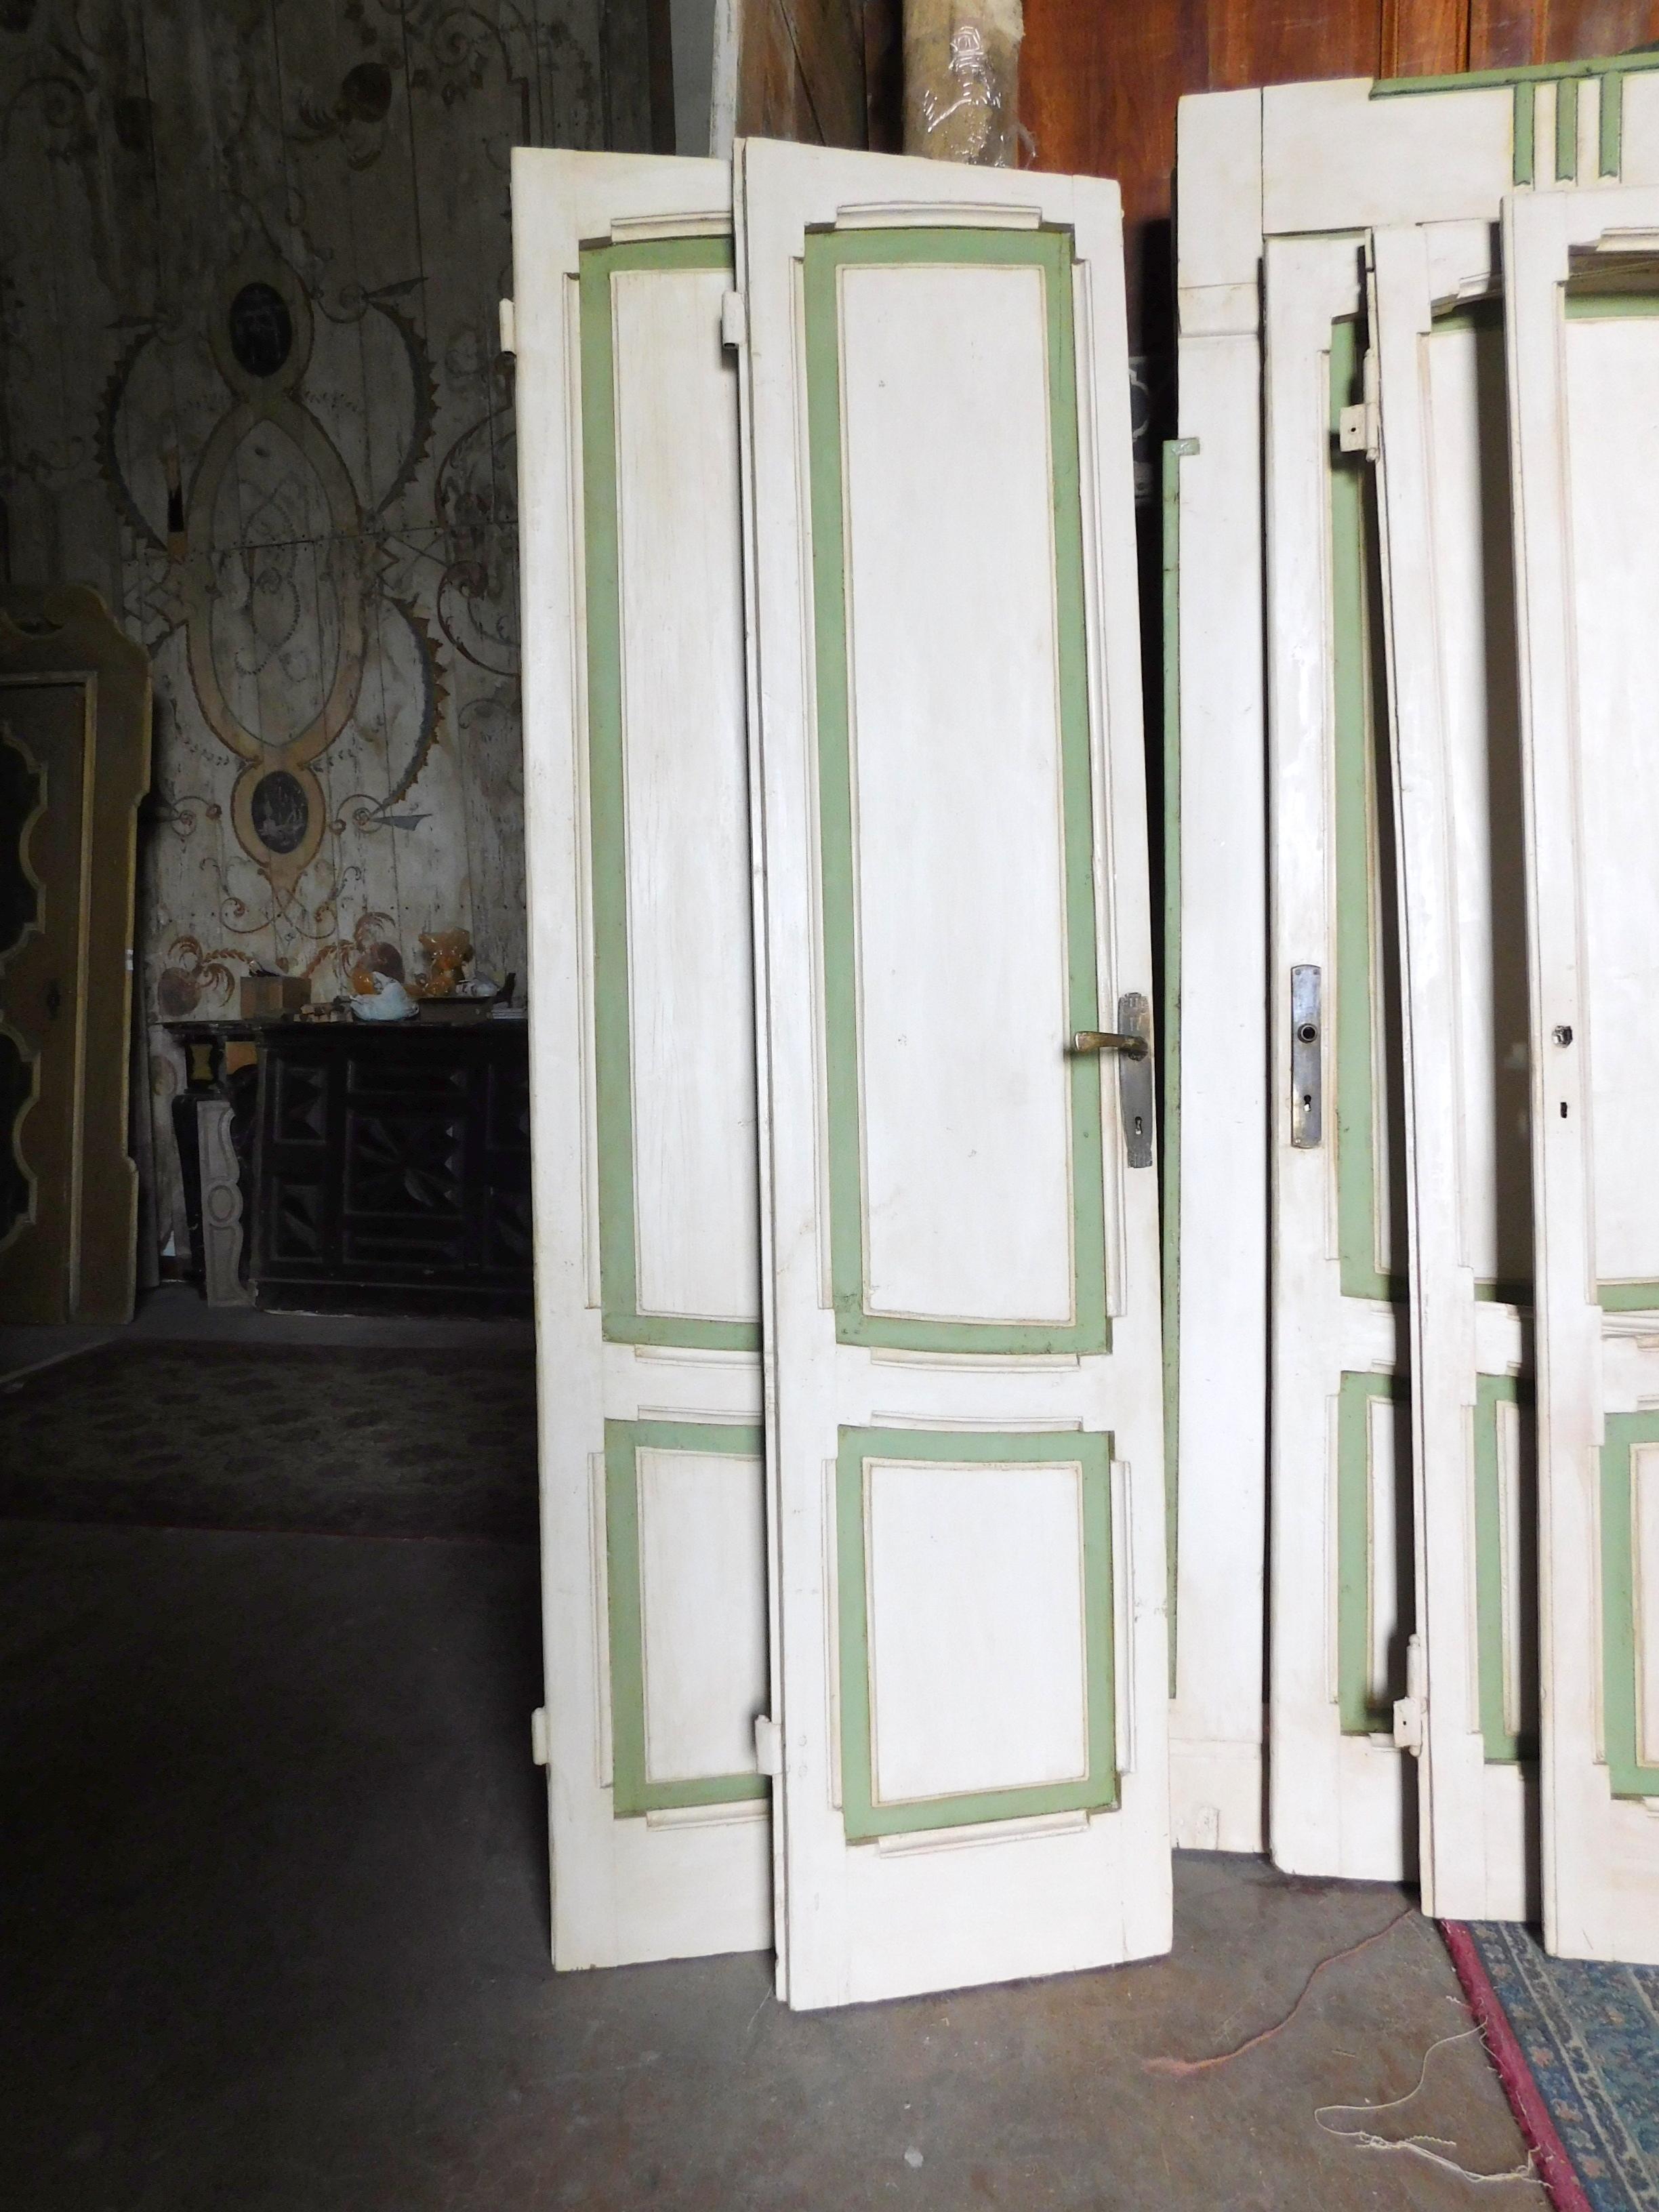 Set of 4 Deco Lacquered Doors, White / Green, Different Size, Milan 1920 For Sale 5